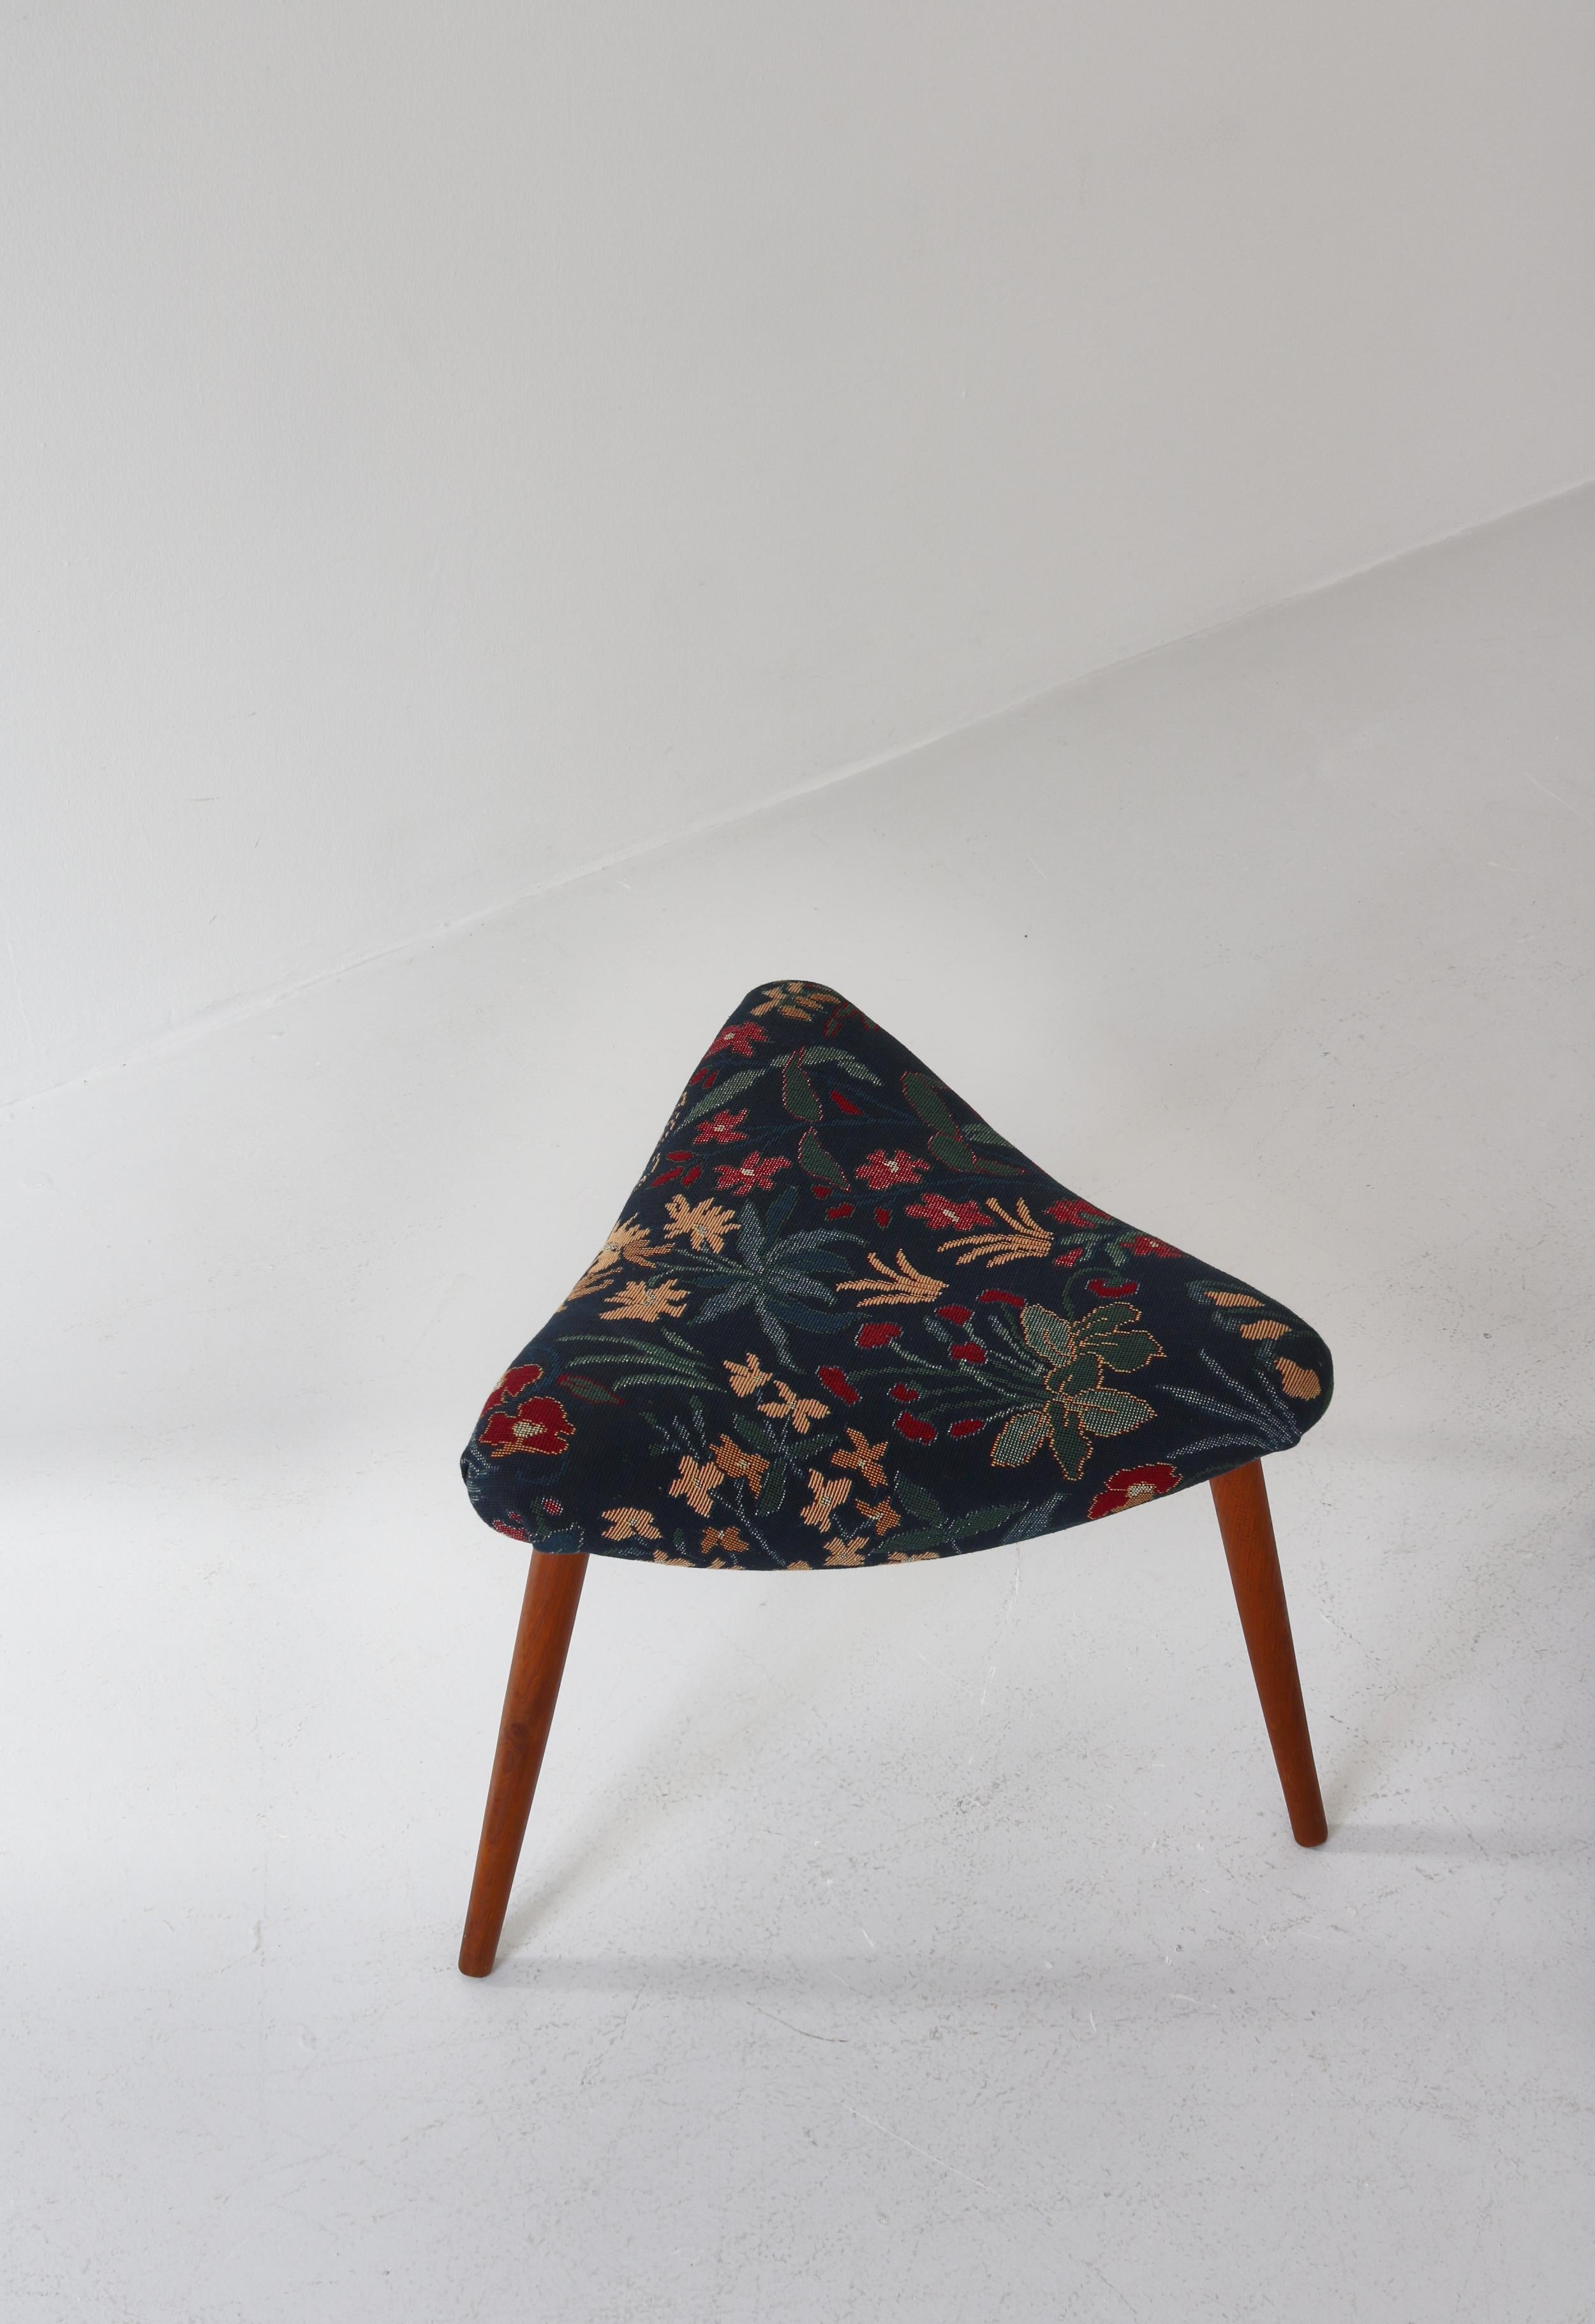 Scandinavian Modern Triangular Stools in Blue Floral Tapestry, 1950s For Sale 8